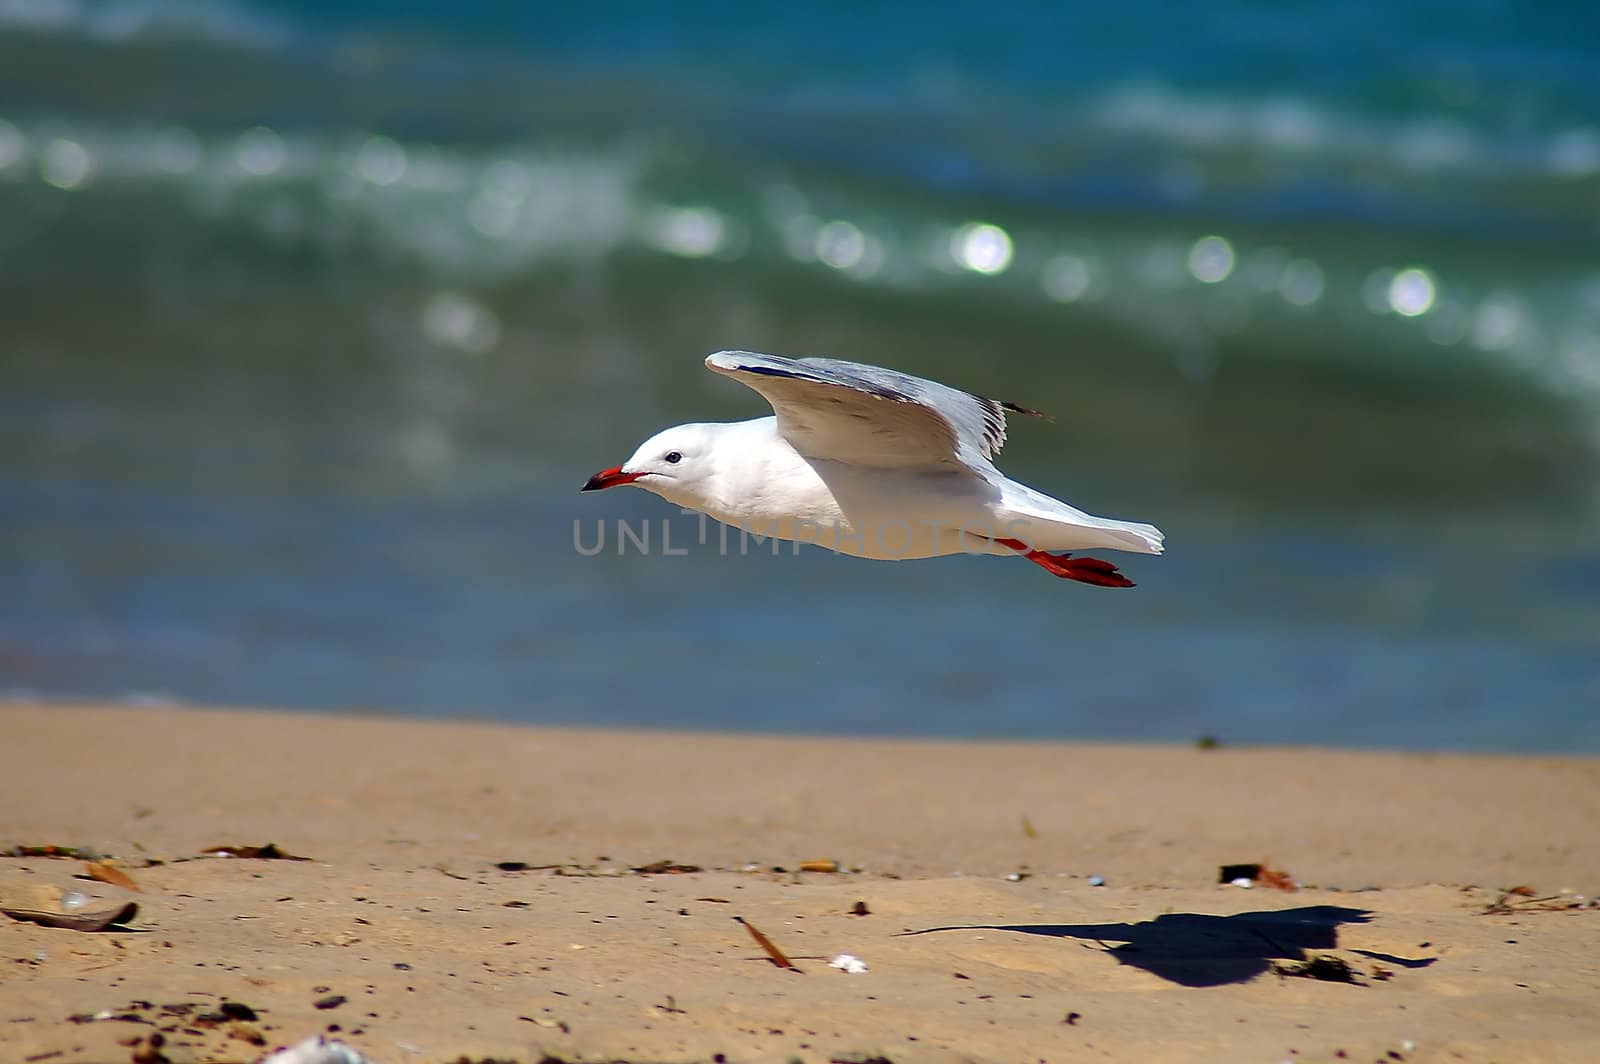 seagull flying over dirty sand beach, blurred ocean in background